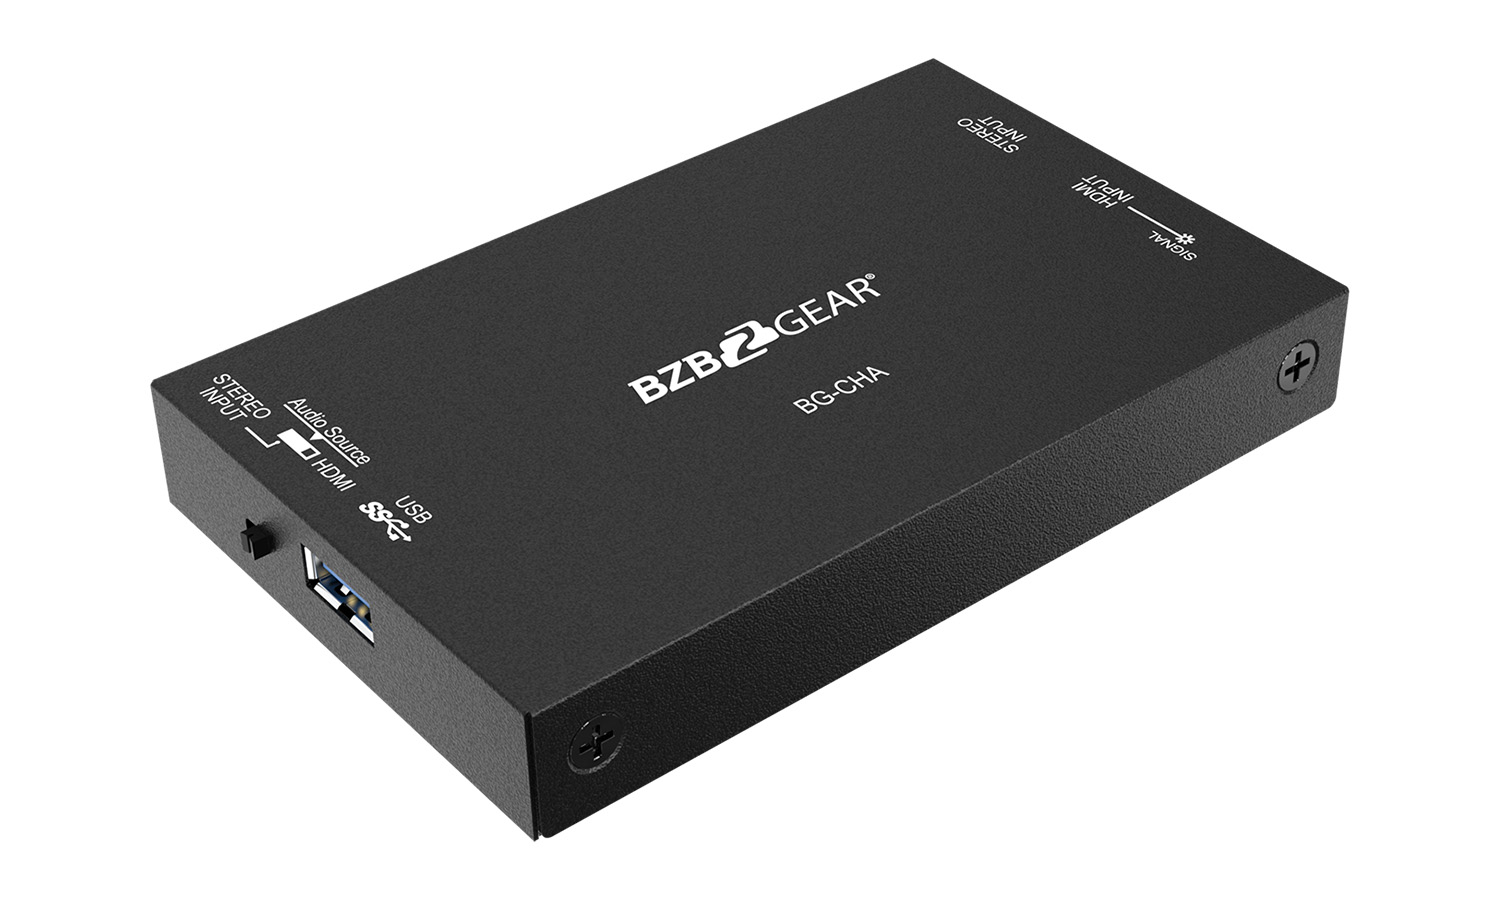 BG-CHA USB 3.1 1080P FHD HDMI Video Capture Card with Scaler and Audio by BZBGEAR